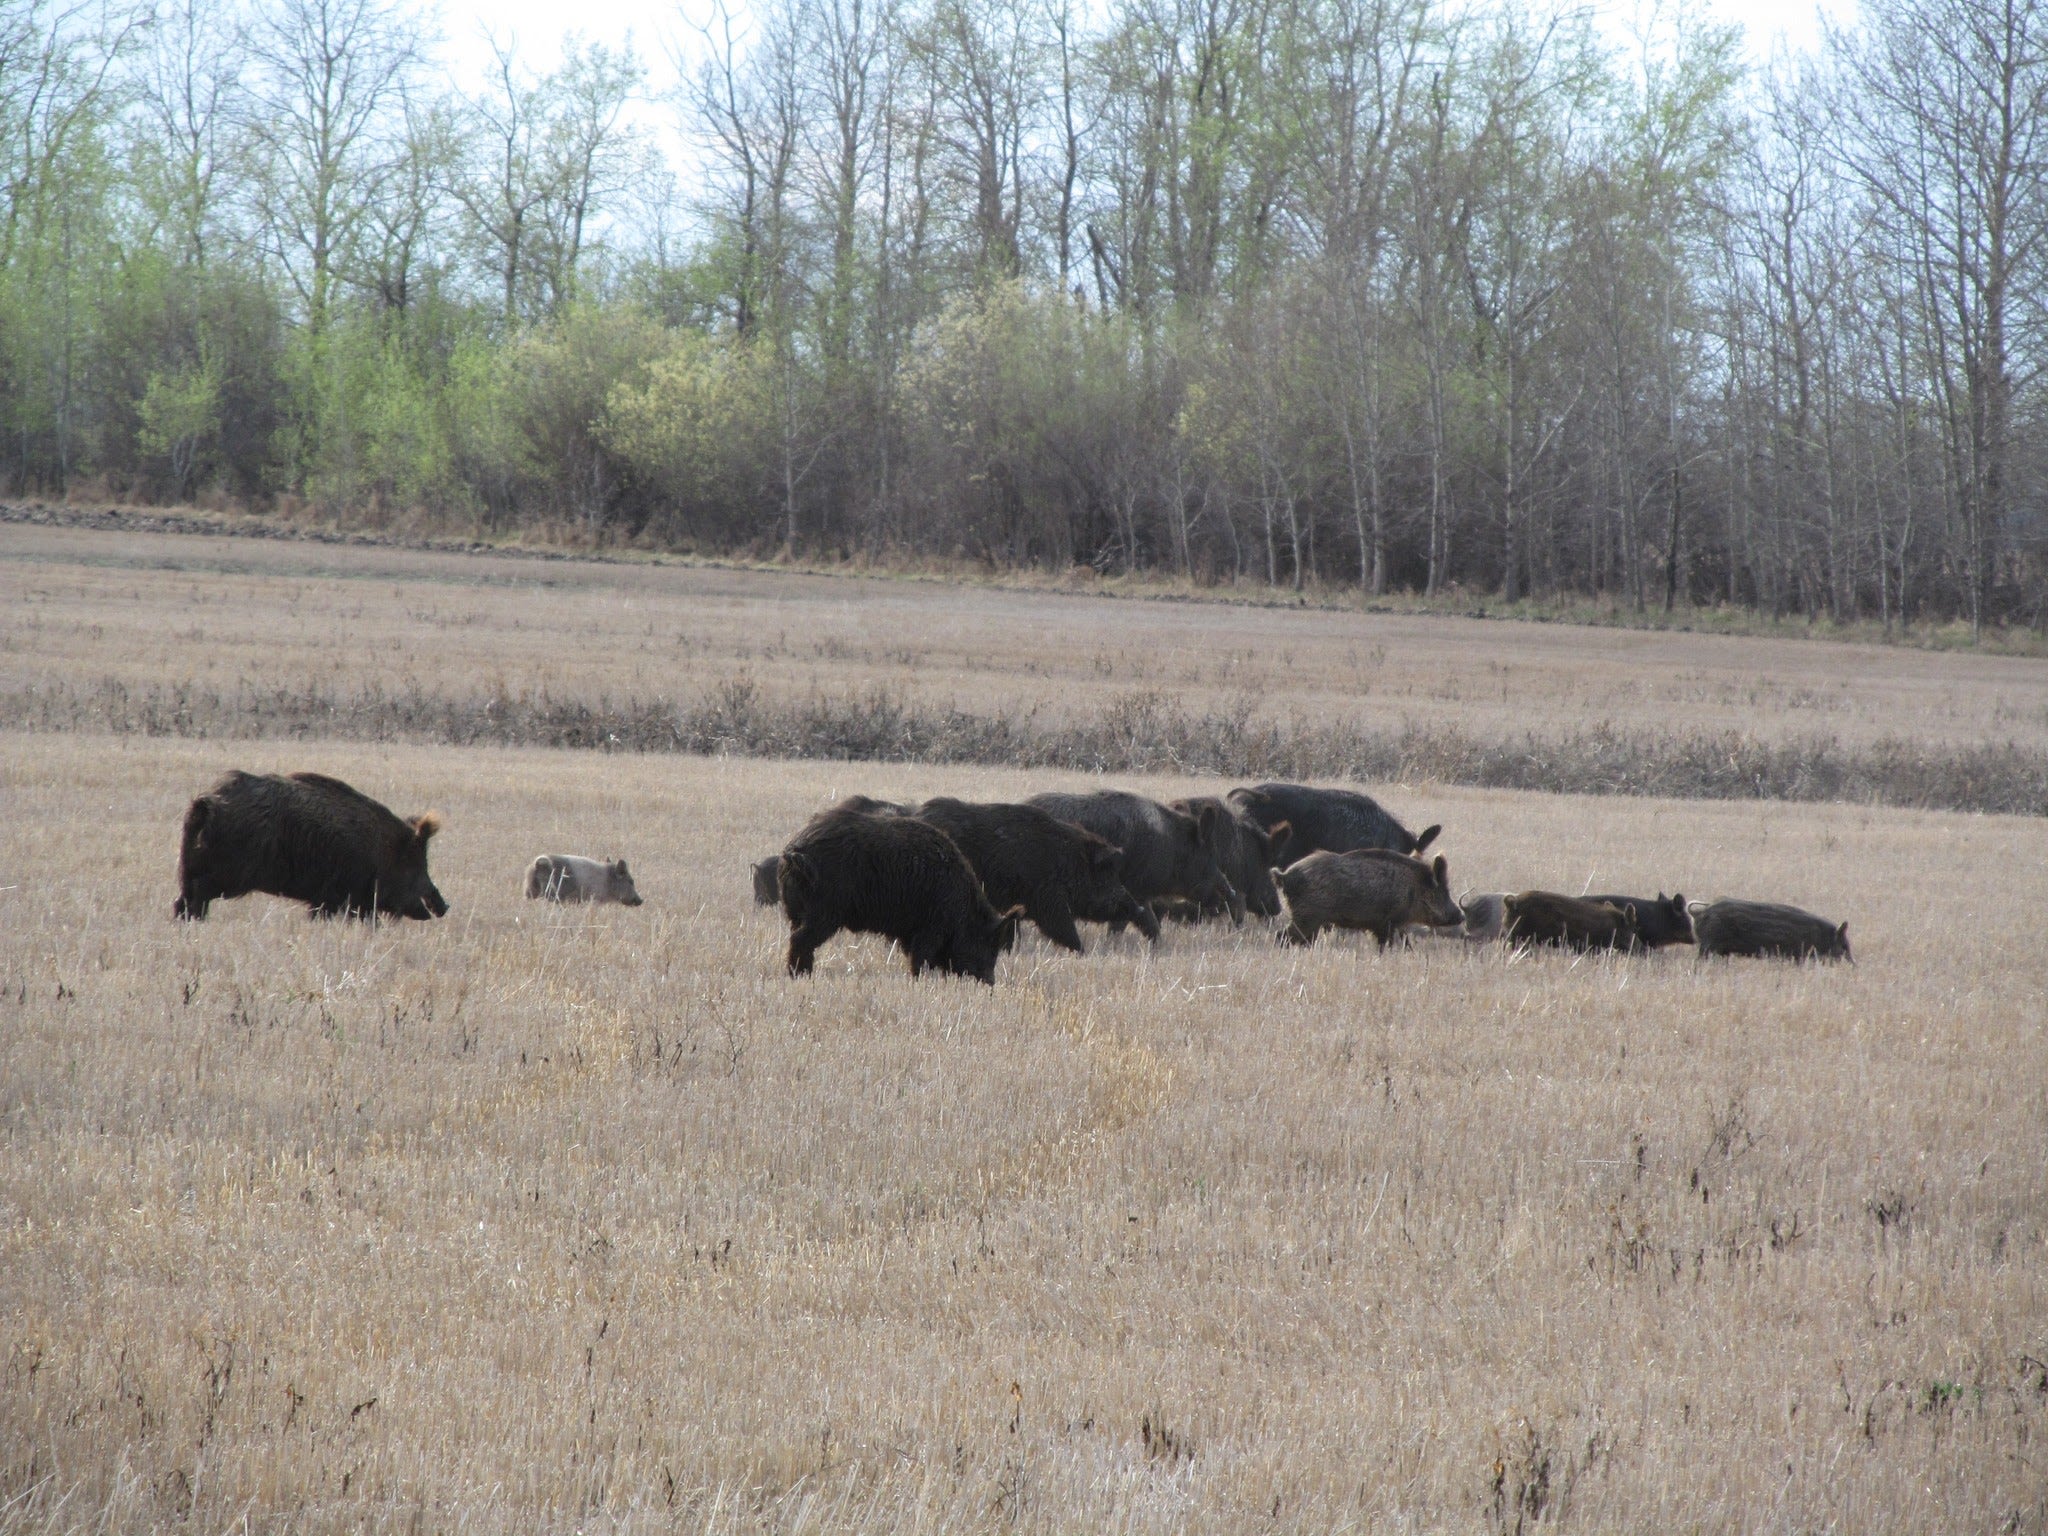 New Study: Canada’s “Super Pig” Invasion Likely to Spread into Northern U.S.